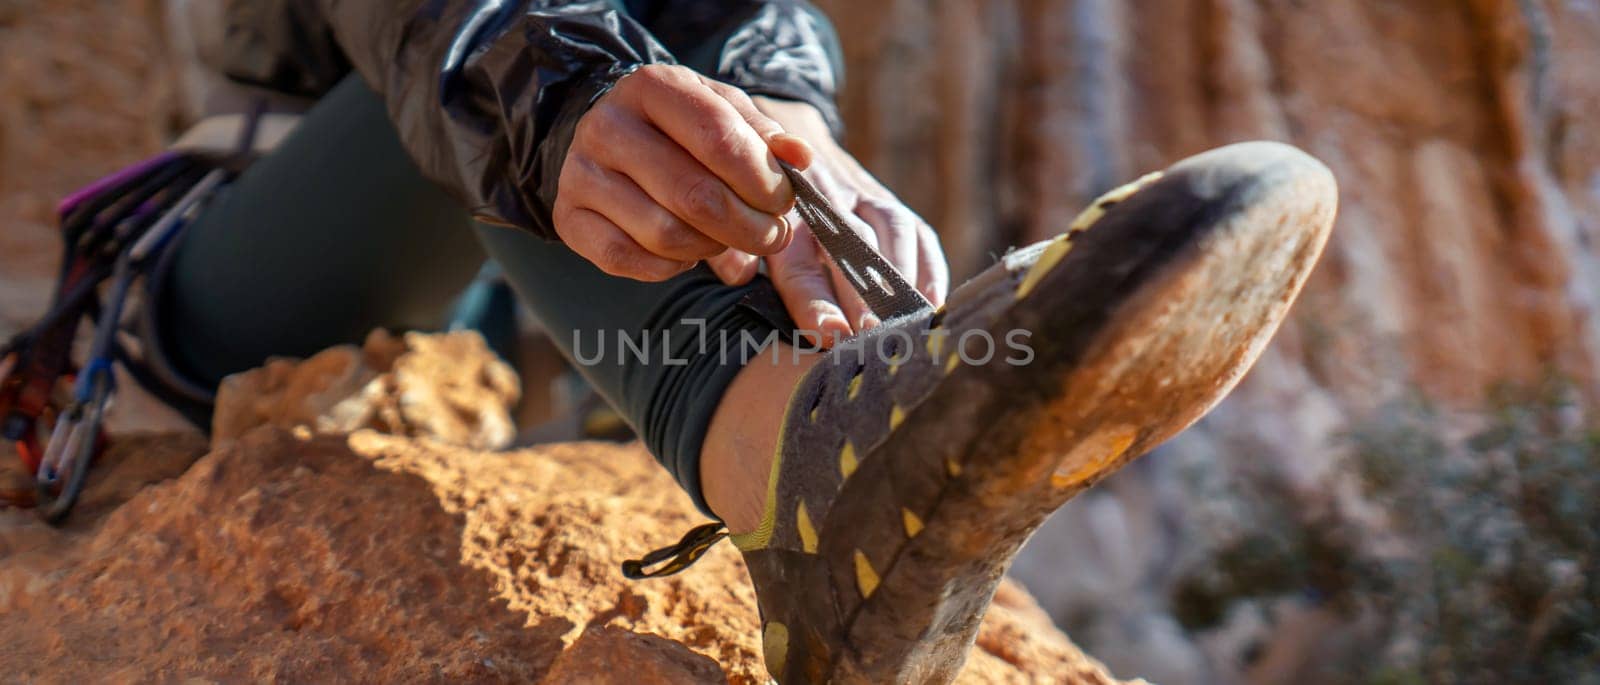 A young girl puts on special climbing shoes on her legs before climbing outdoor training, hands and feet close-up. A woman leads an active lifestyle, is involved in mountaineering and rock climbing.